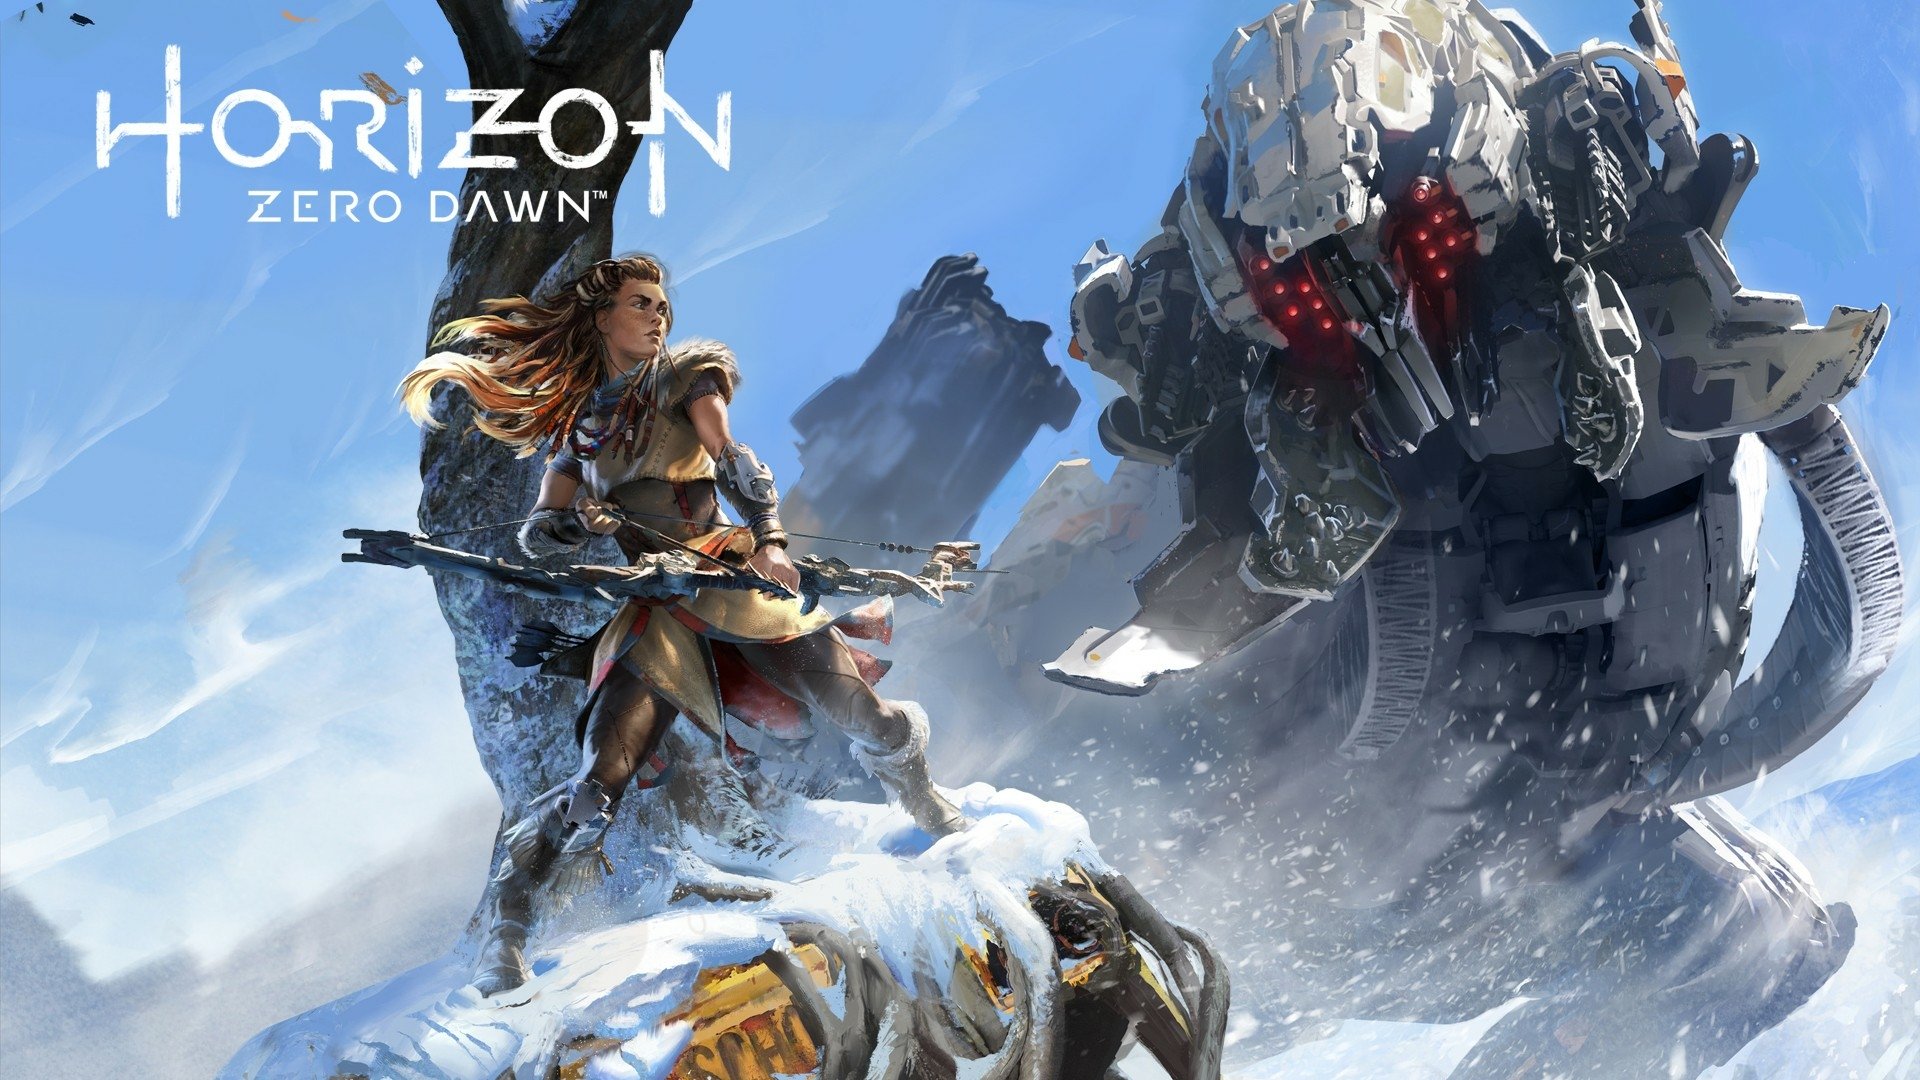 199 Horizon Zero Dawn Hd Wallpapers Background Images Images, Photos, Reviews